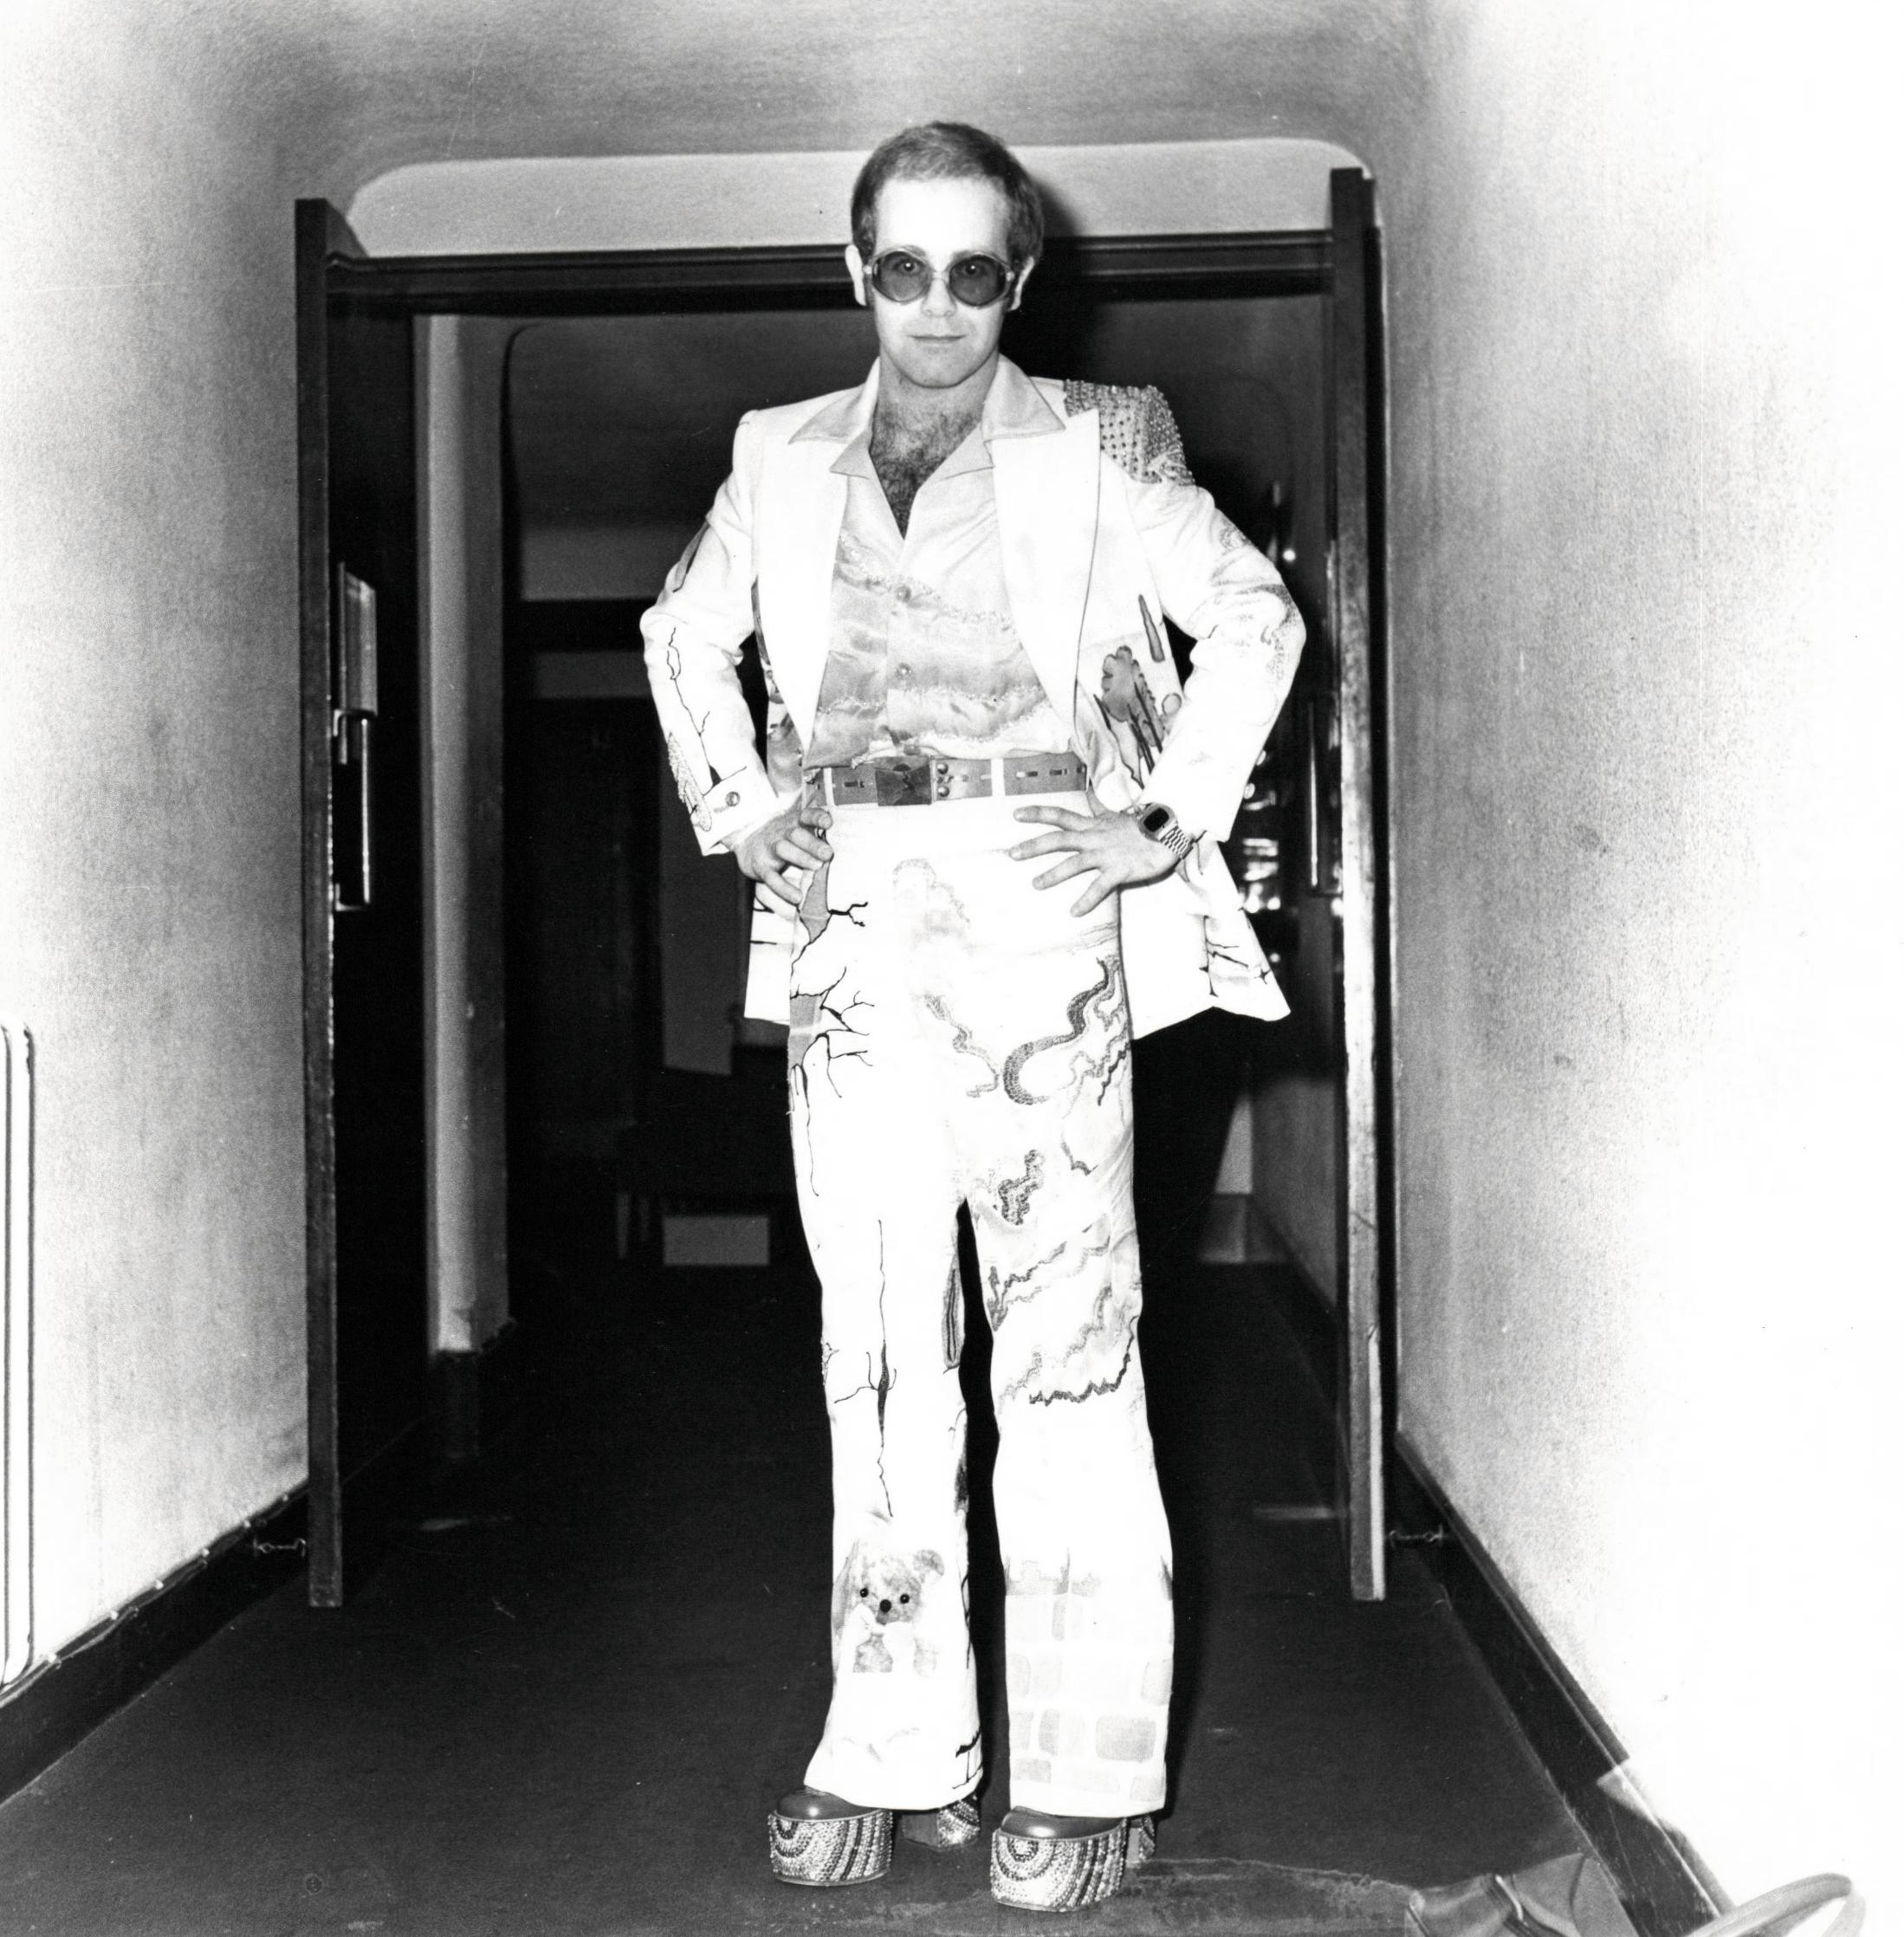 Unknown Black and White Photograph - Elton John Posed in Suit Vintage Original Photograph